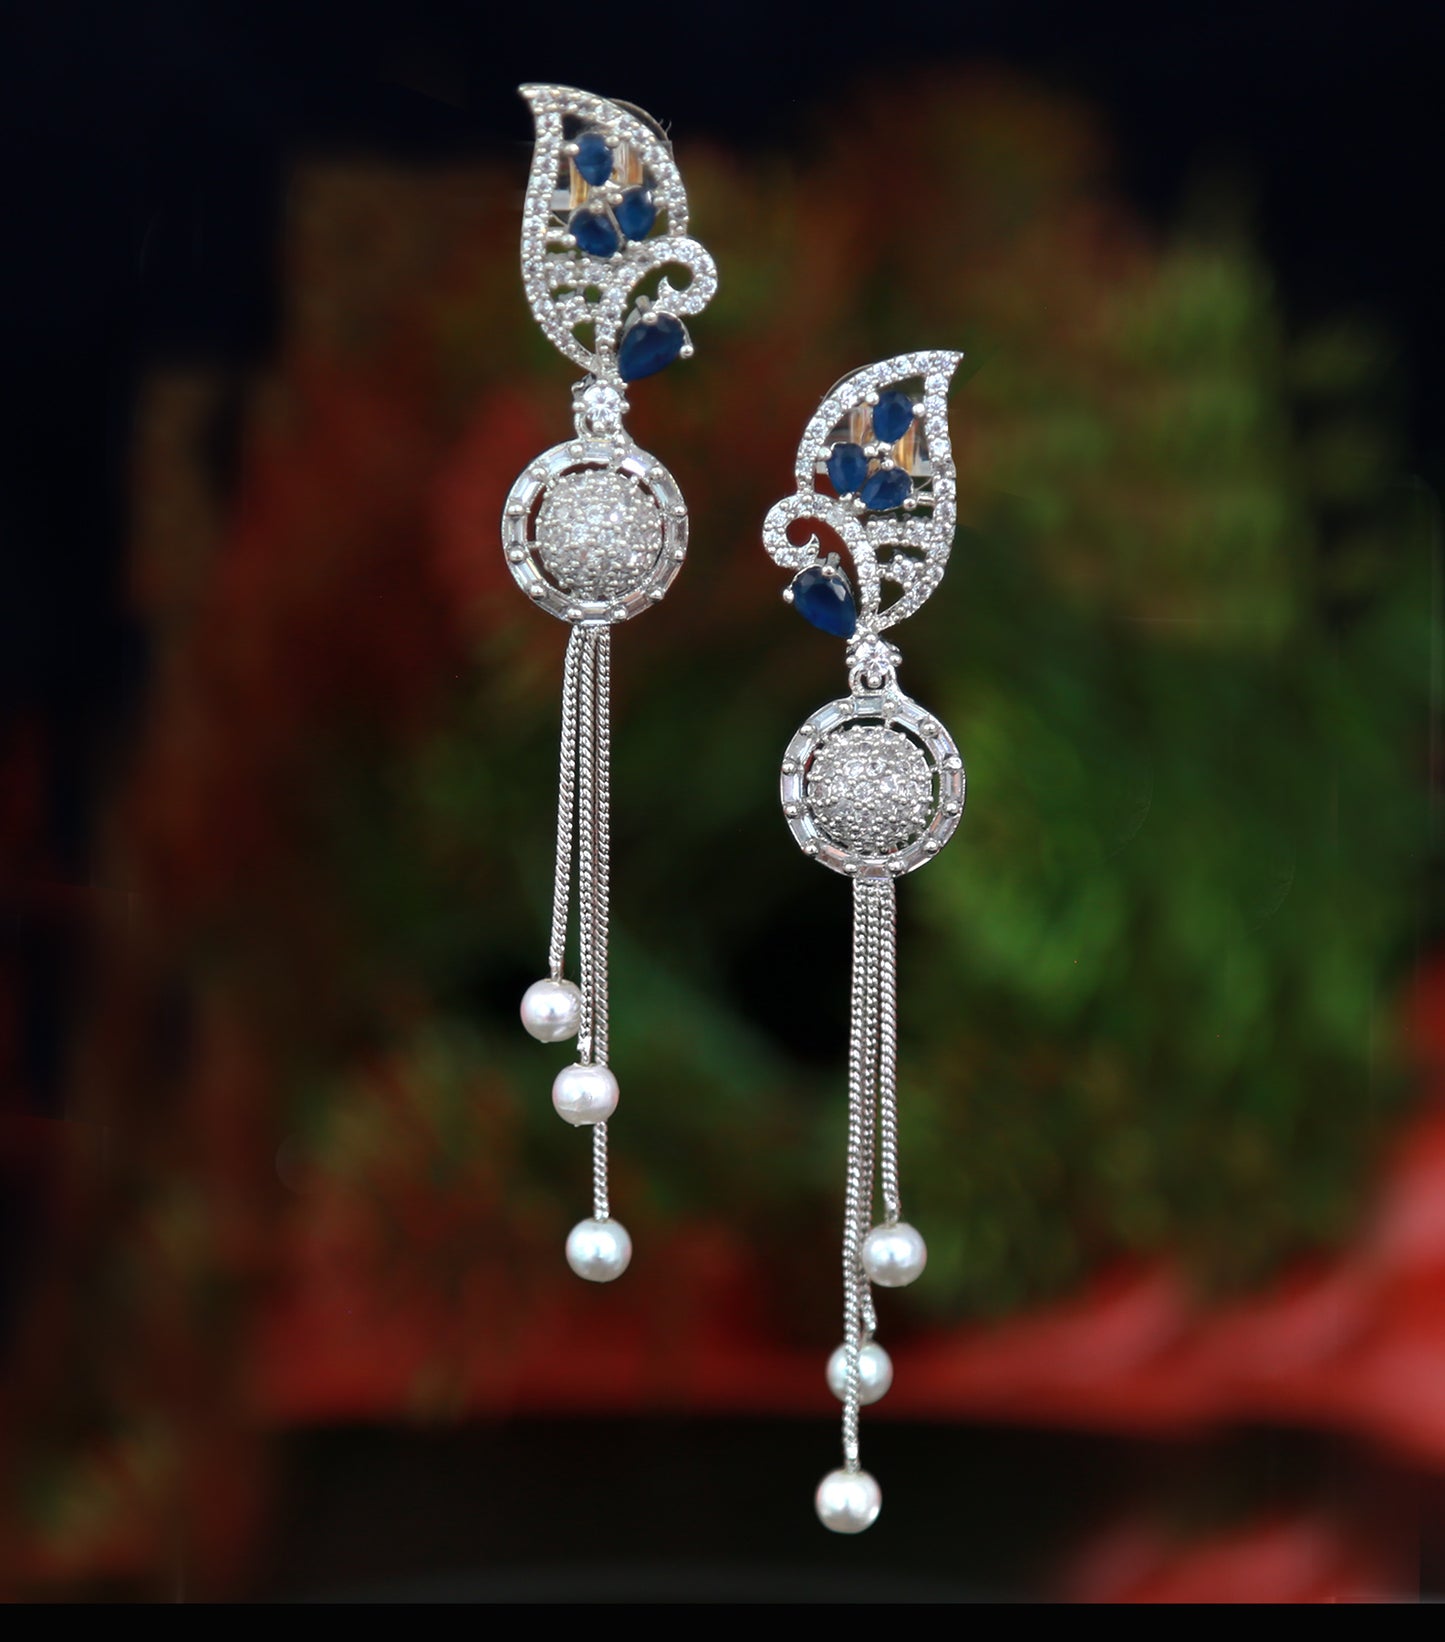 American Diamond Floral Design Silver Tone Earrings with Pearls and Color Stones